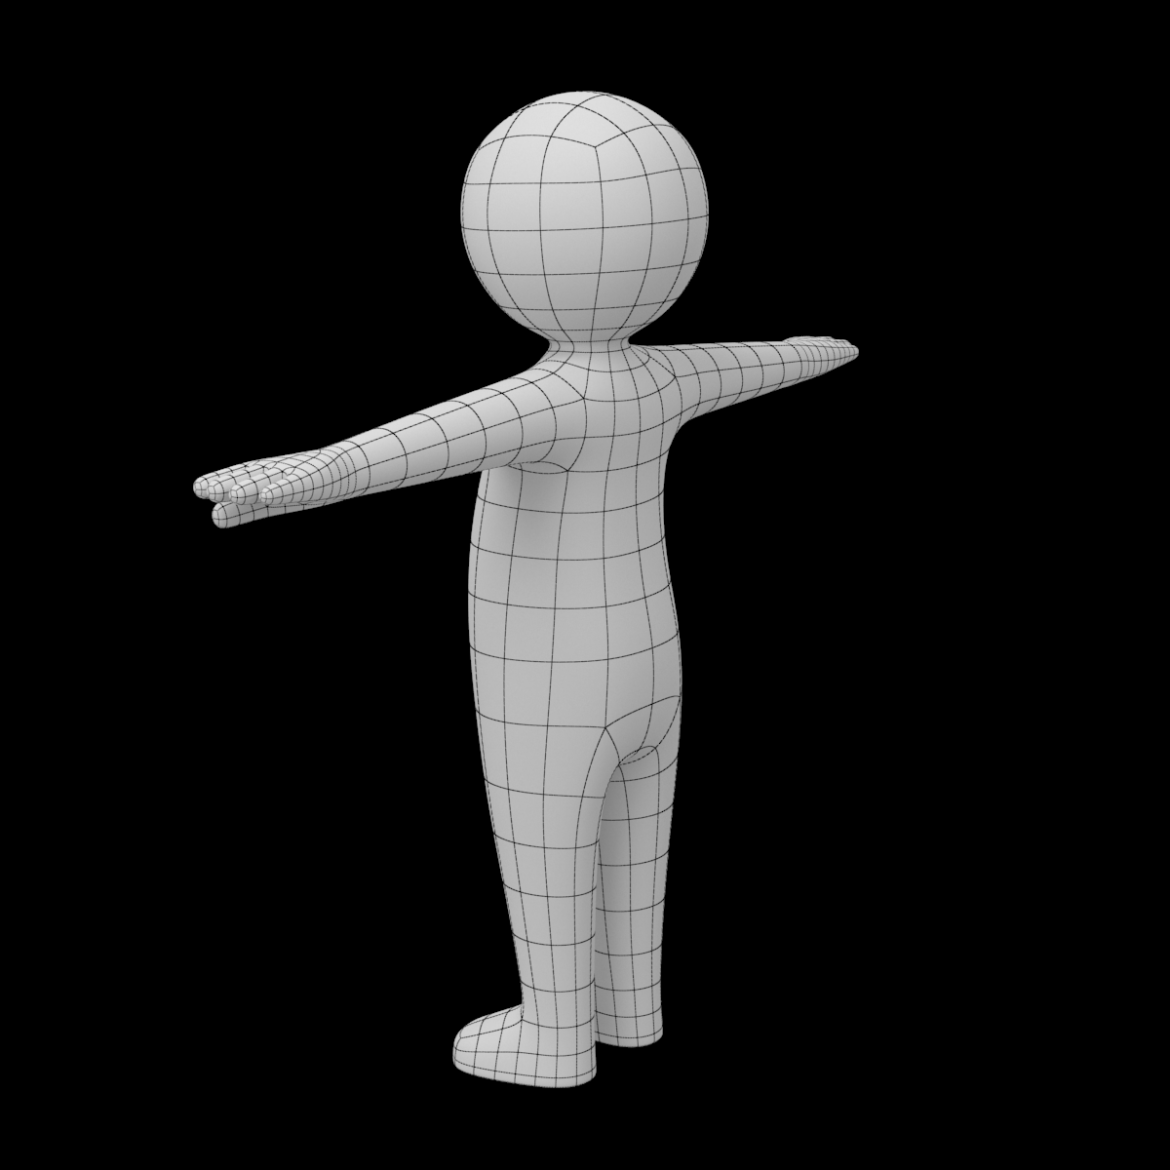  <a class="continue" href="https://www.flatpyramid.com/3d-models/characters-3d-models/human-types/toddler-baby-child-stickman-in-t-pose/">Continue Reading<span> Toddler Baby Child Stickman in T-Pose</span></a>